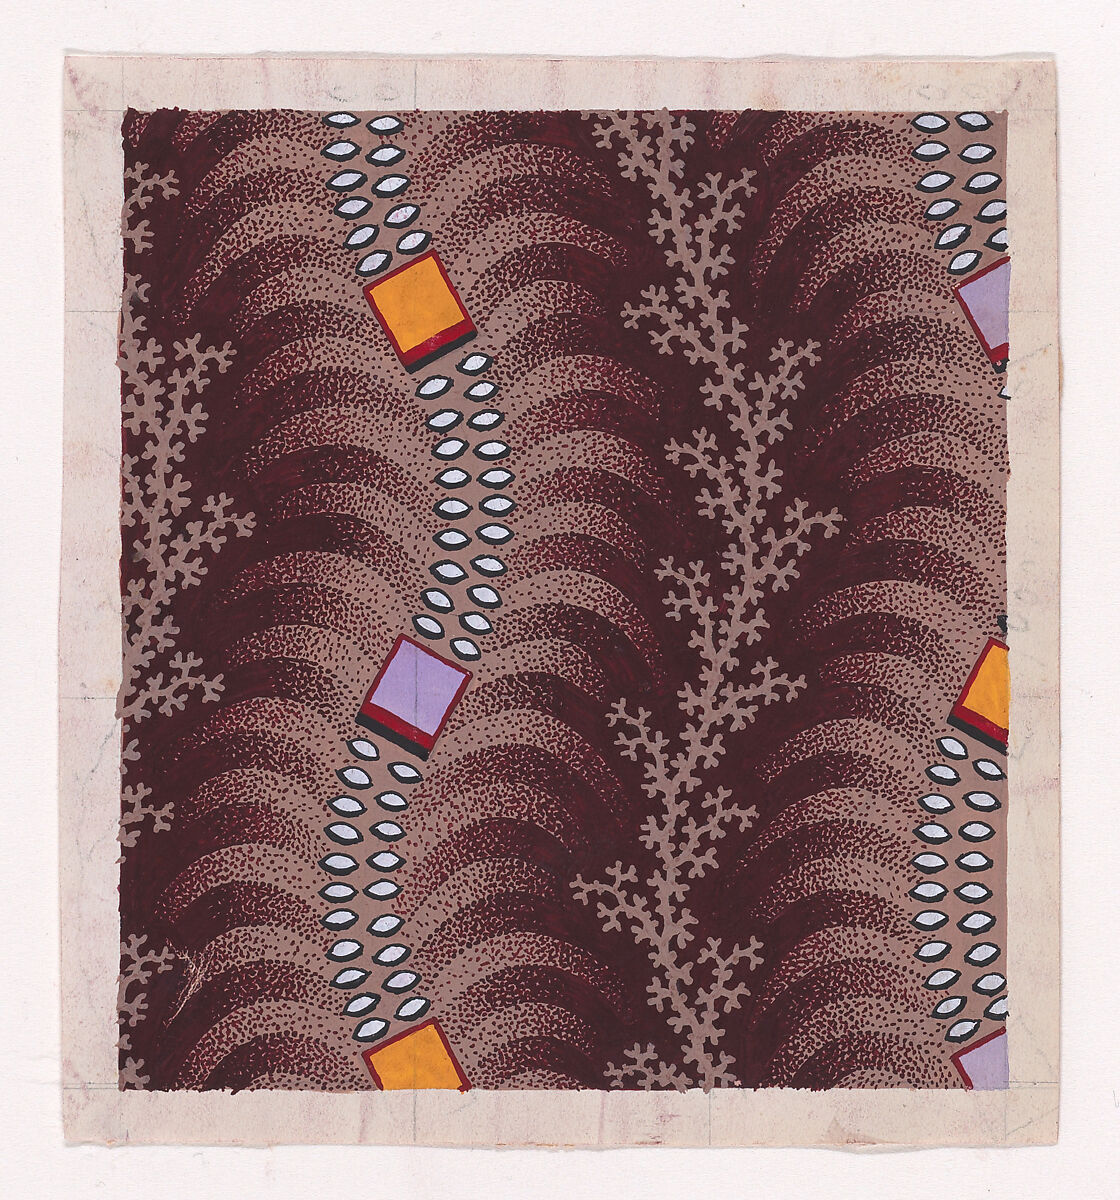 Textile Design with Undulating Vertical Strips of Squares Joined by Lens-Shaped Pearls over Undulating Stylized Palm Leaves Separated by Vertical Garlands of Branches, Anonymous, Alsatian, 19th century, Gouache 